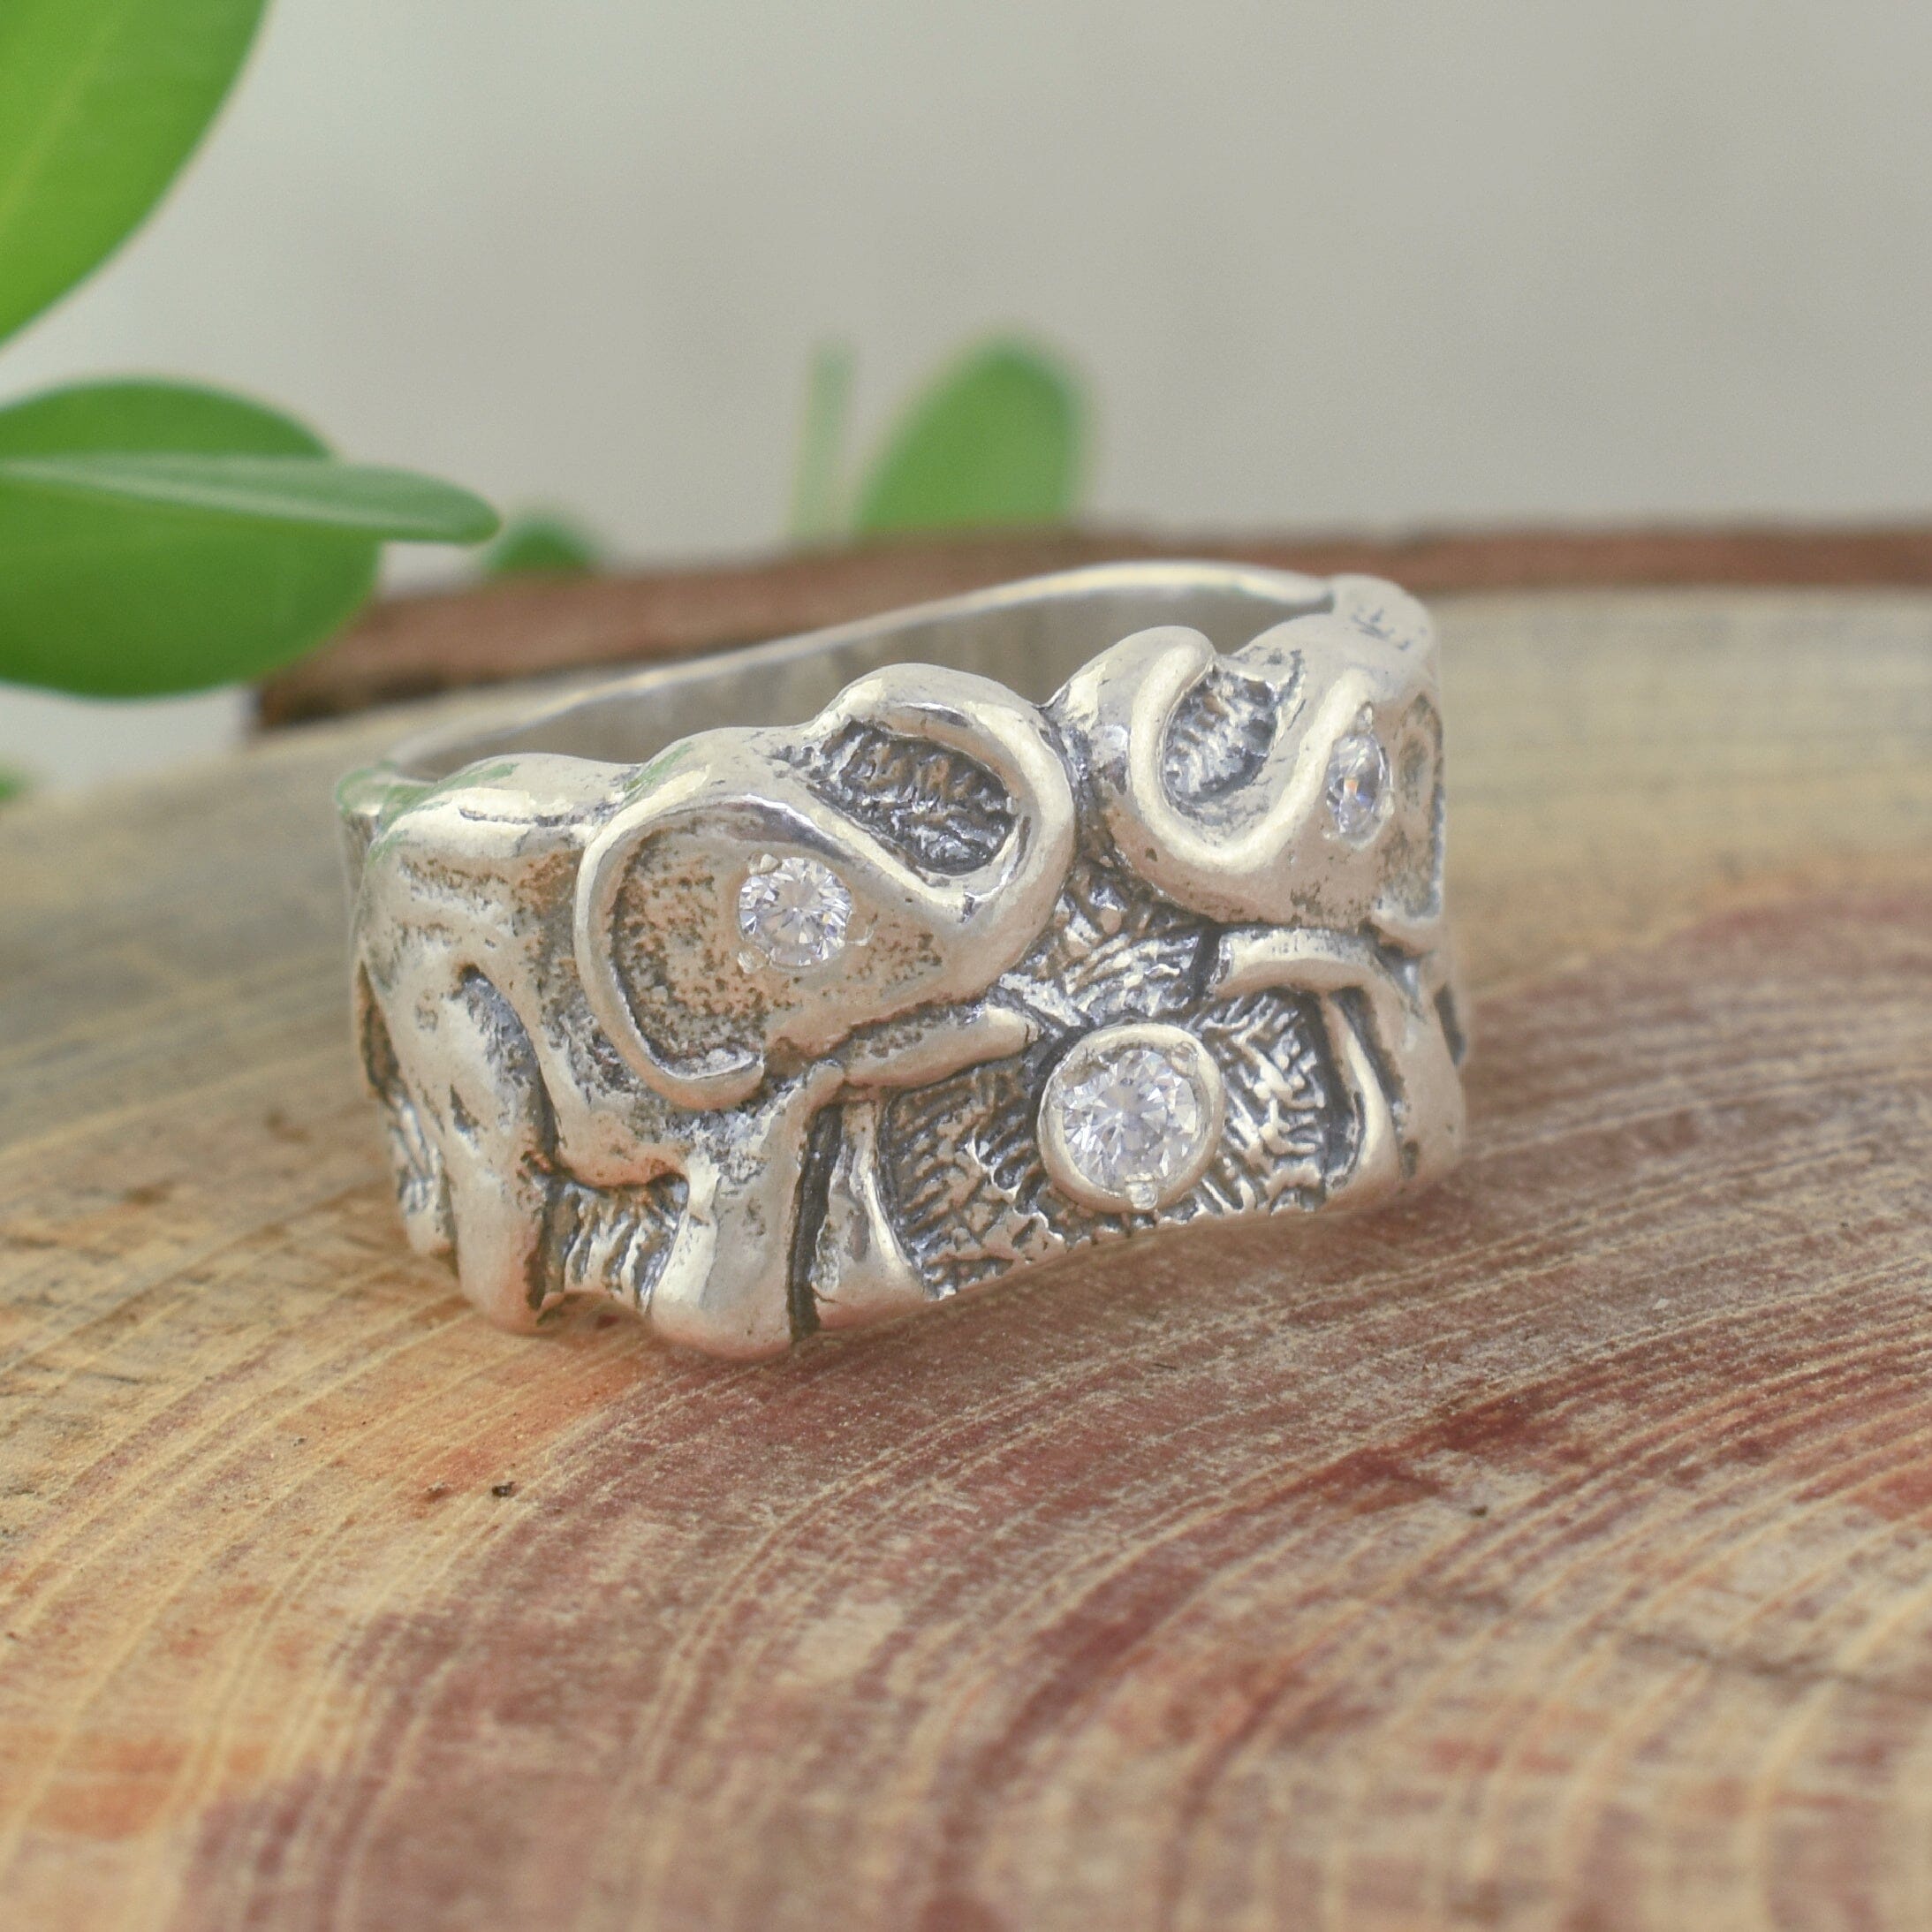 .925 sterling silver elephant ring with cubic zirconia stones